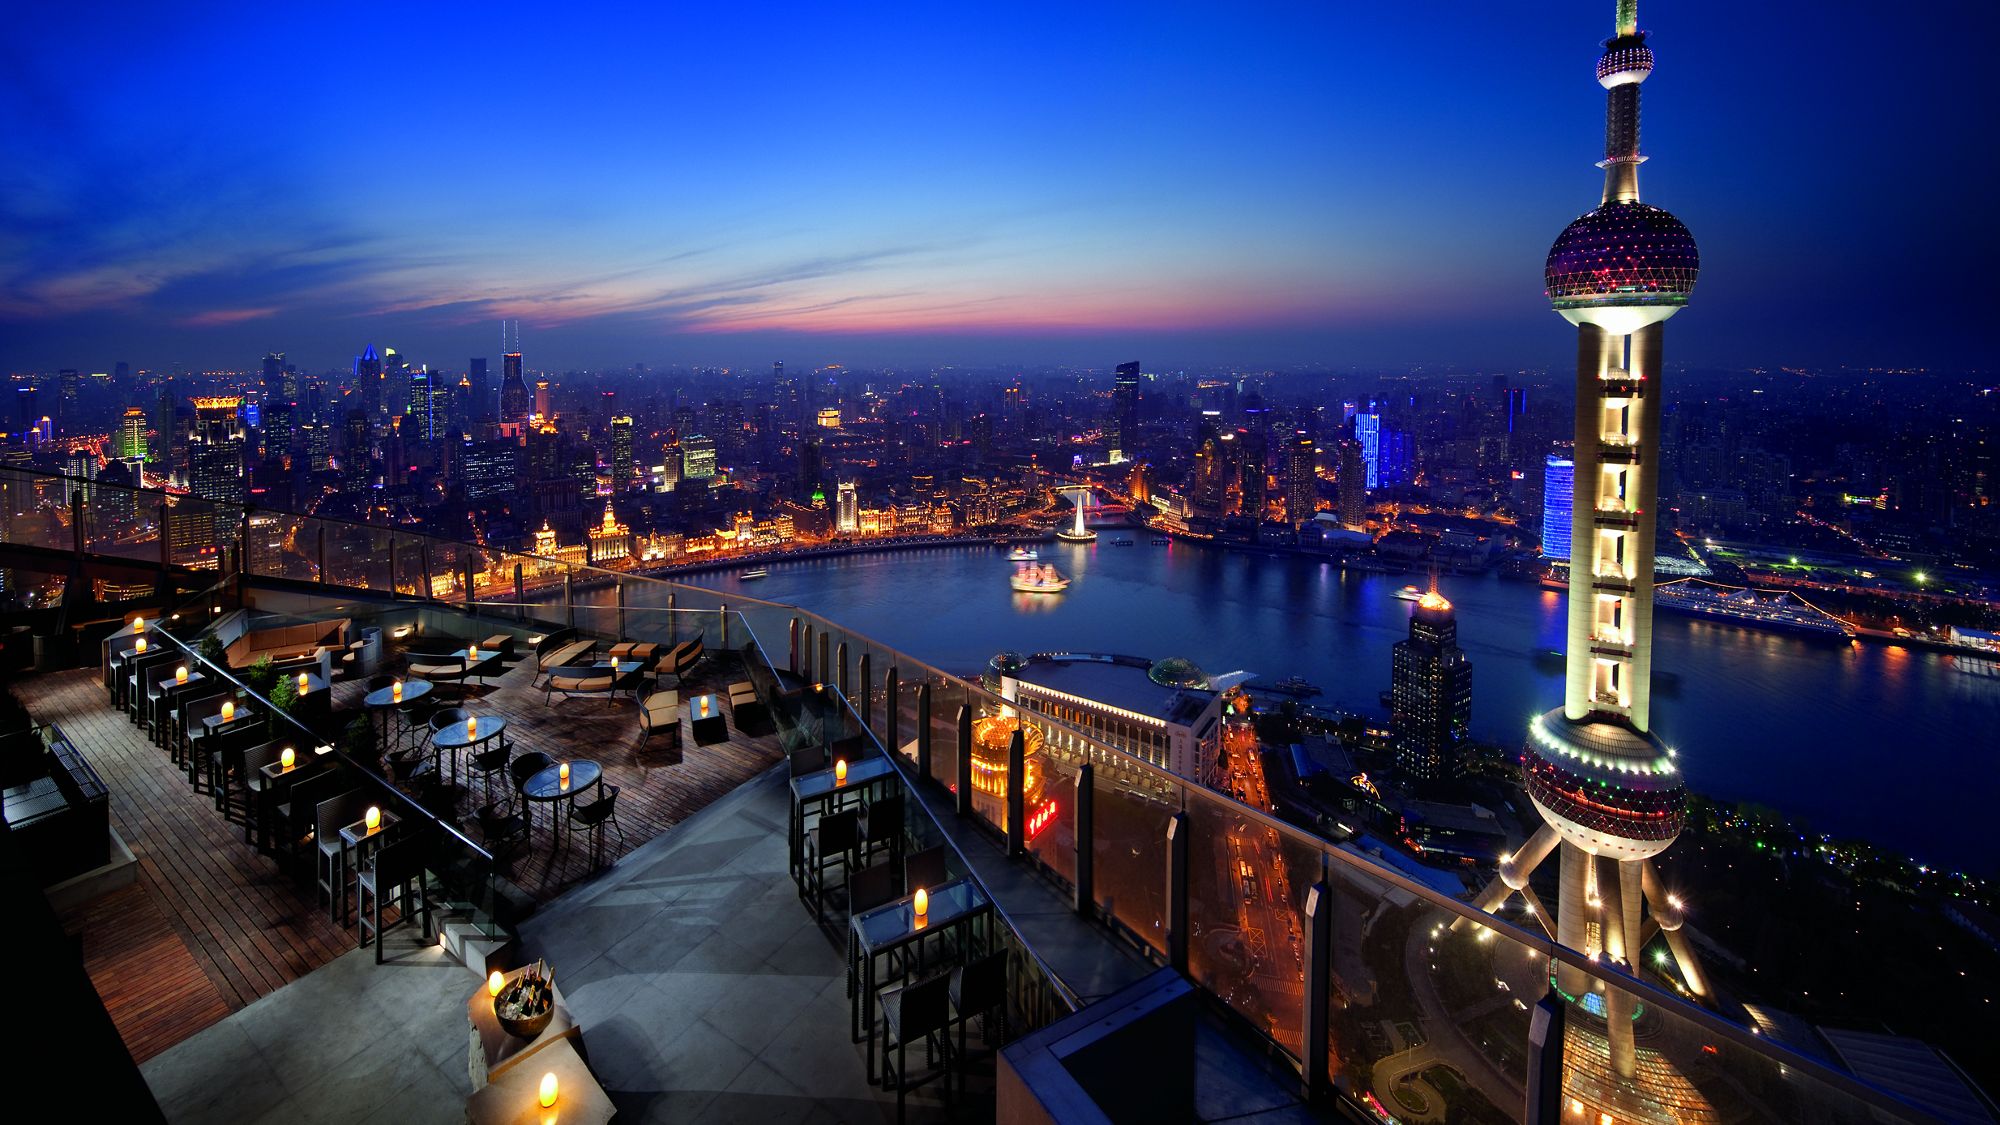 Living the high life: 10 best rooftop bars in Asia